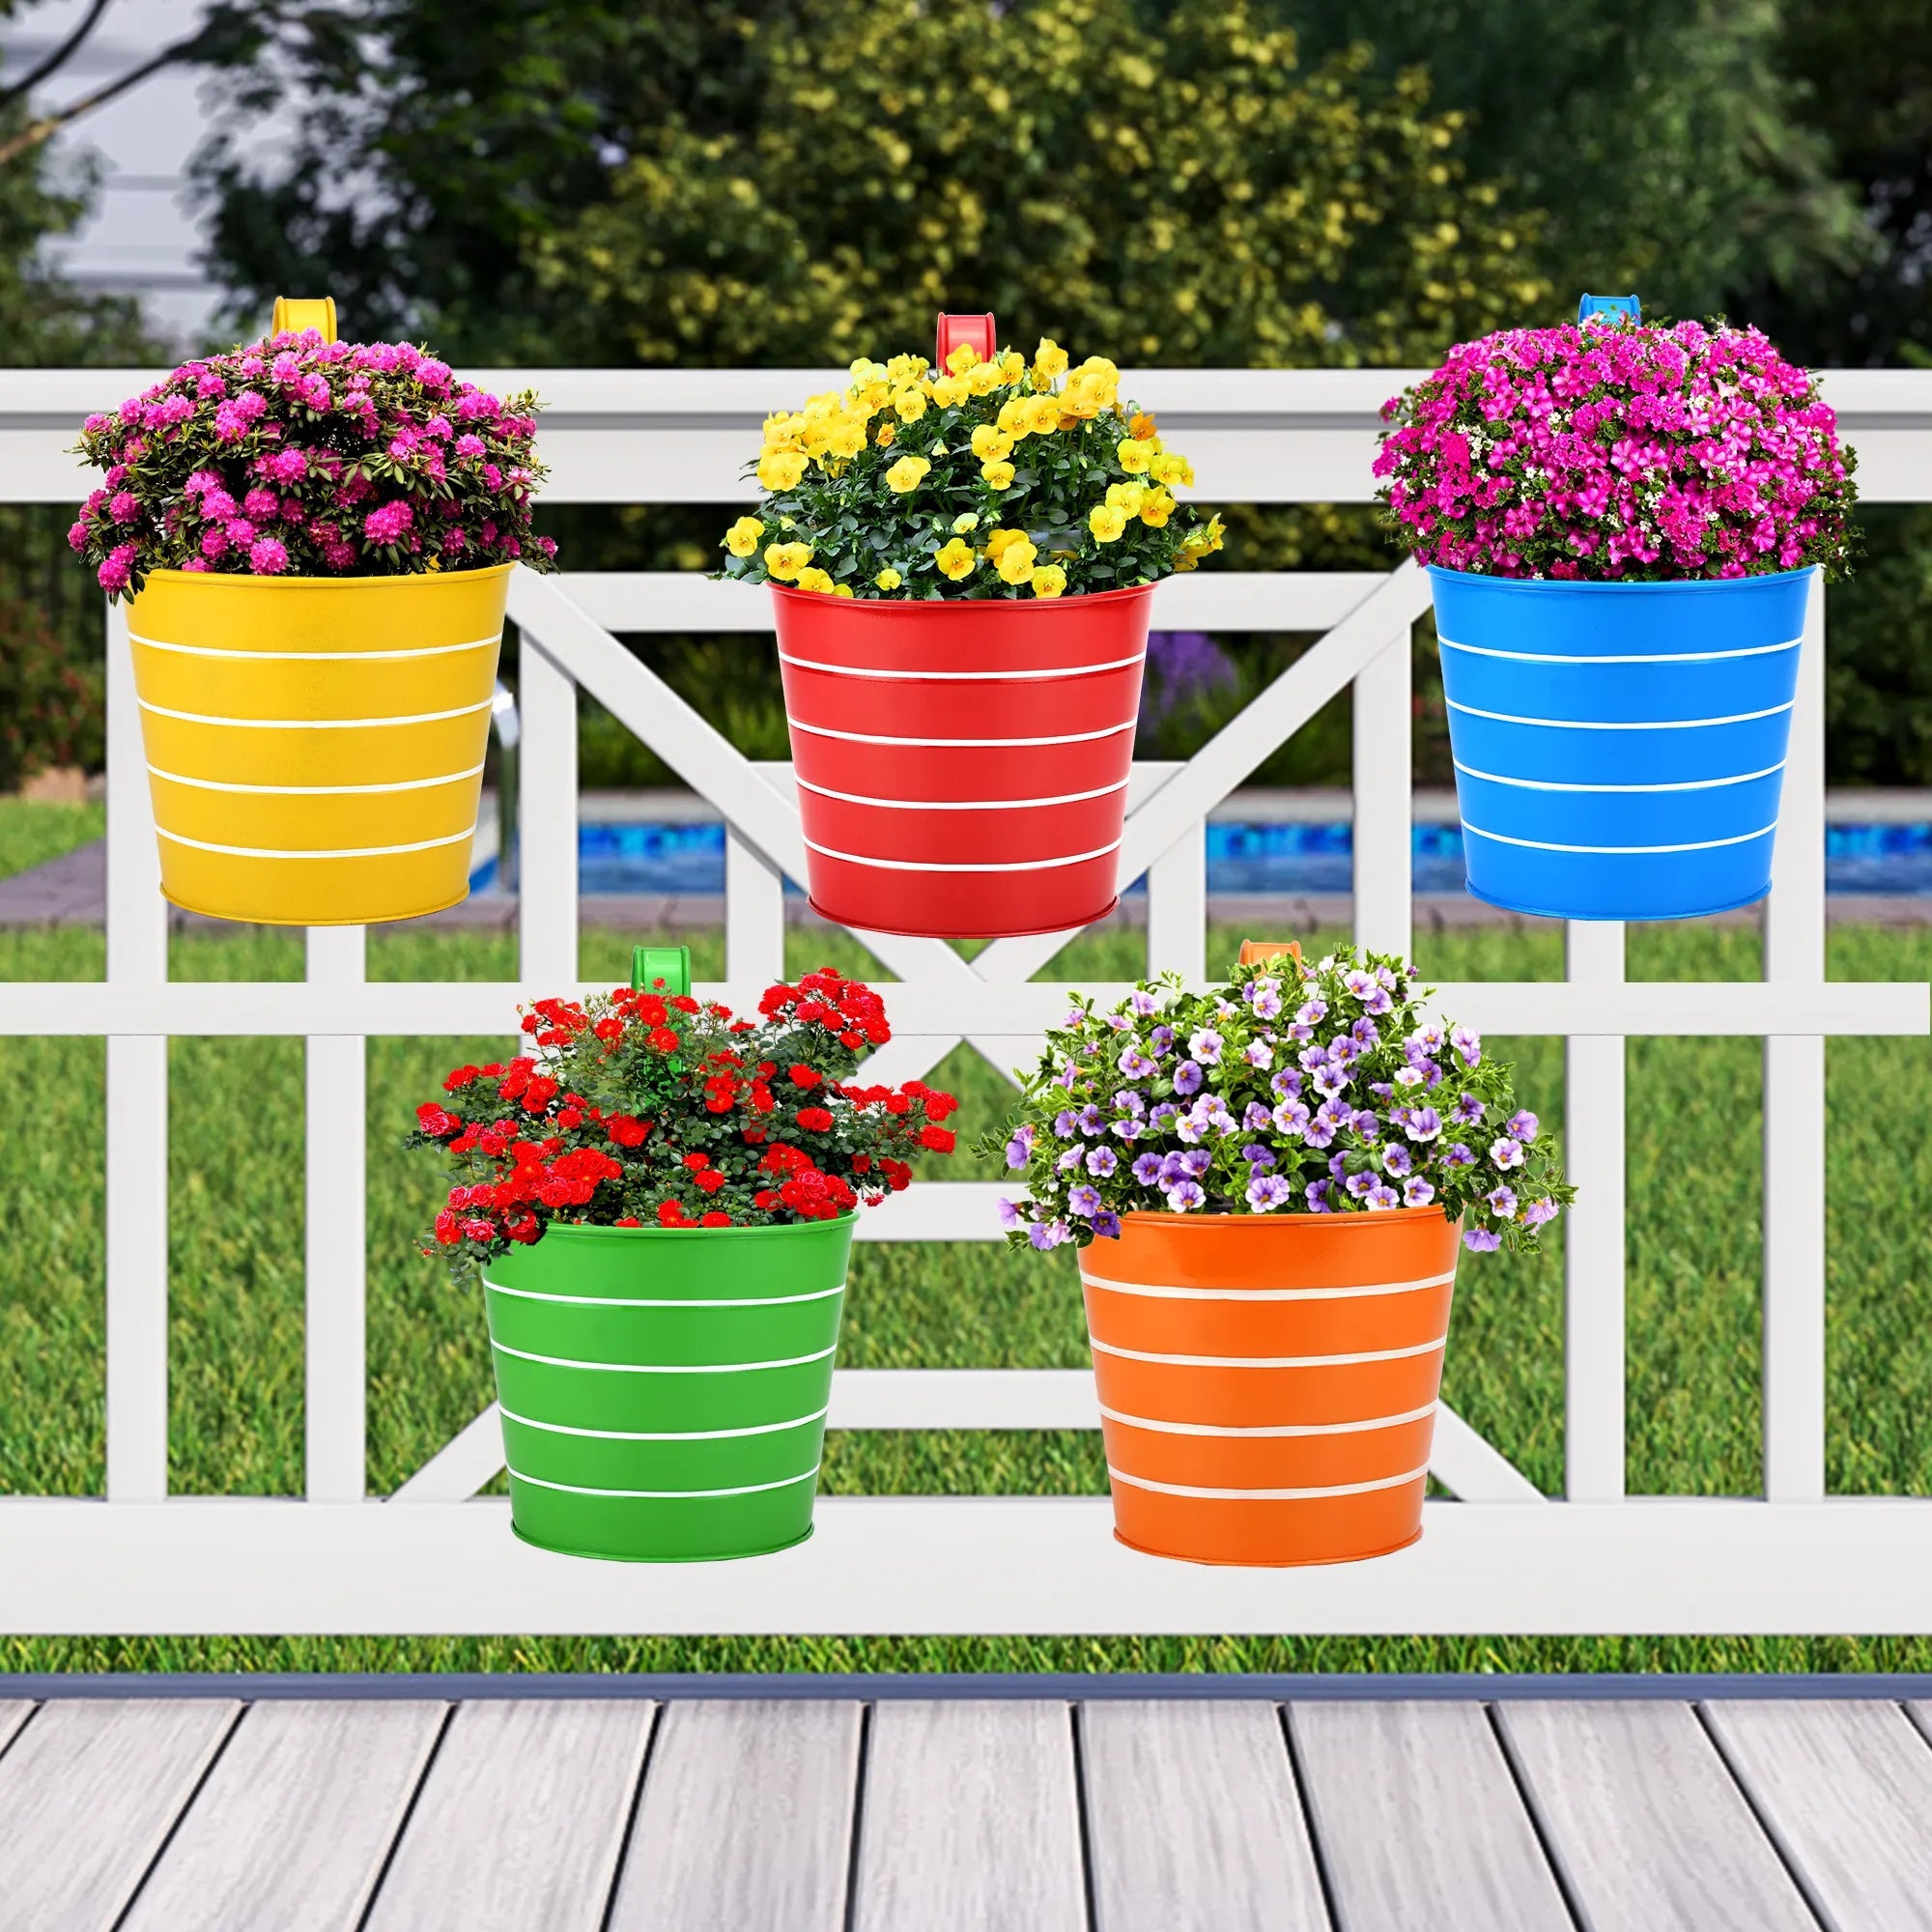 Colorful Round Shape Railing, Balcony Hanging Metal Planters (Multicolored) (Set of 5) Urban Plant 